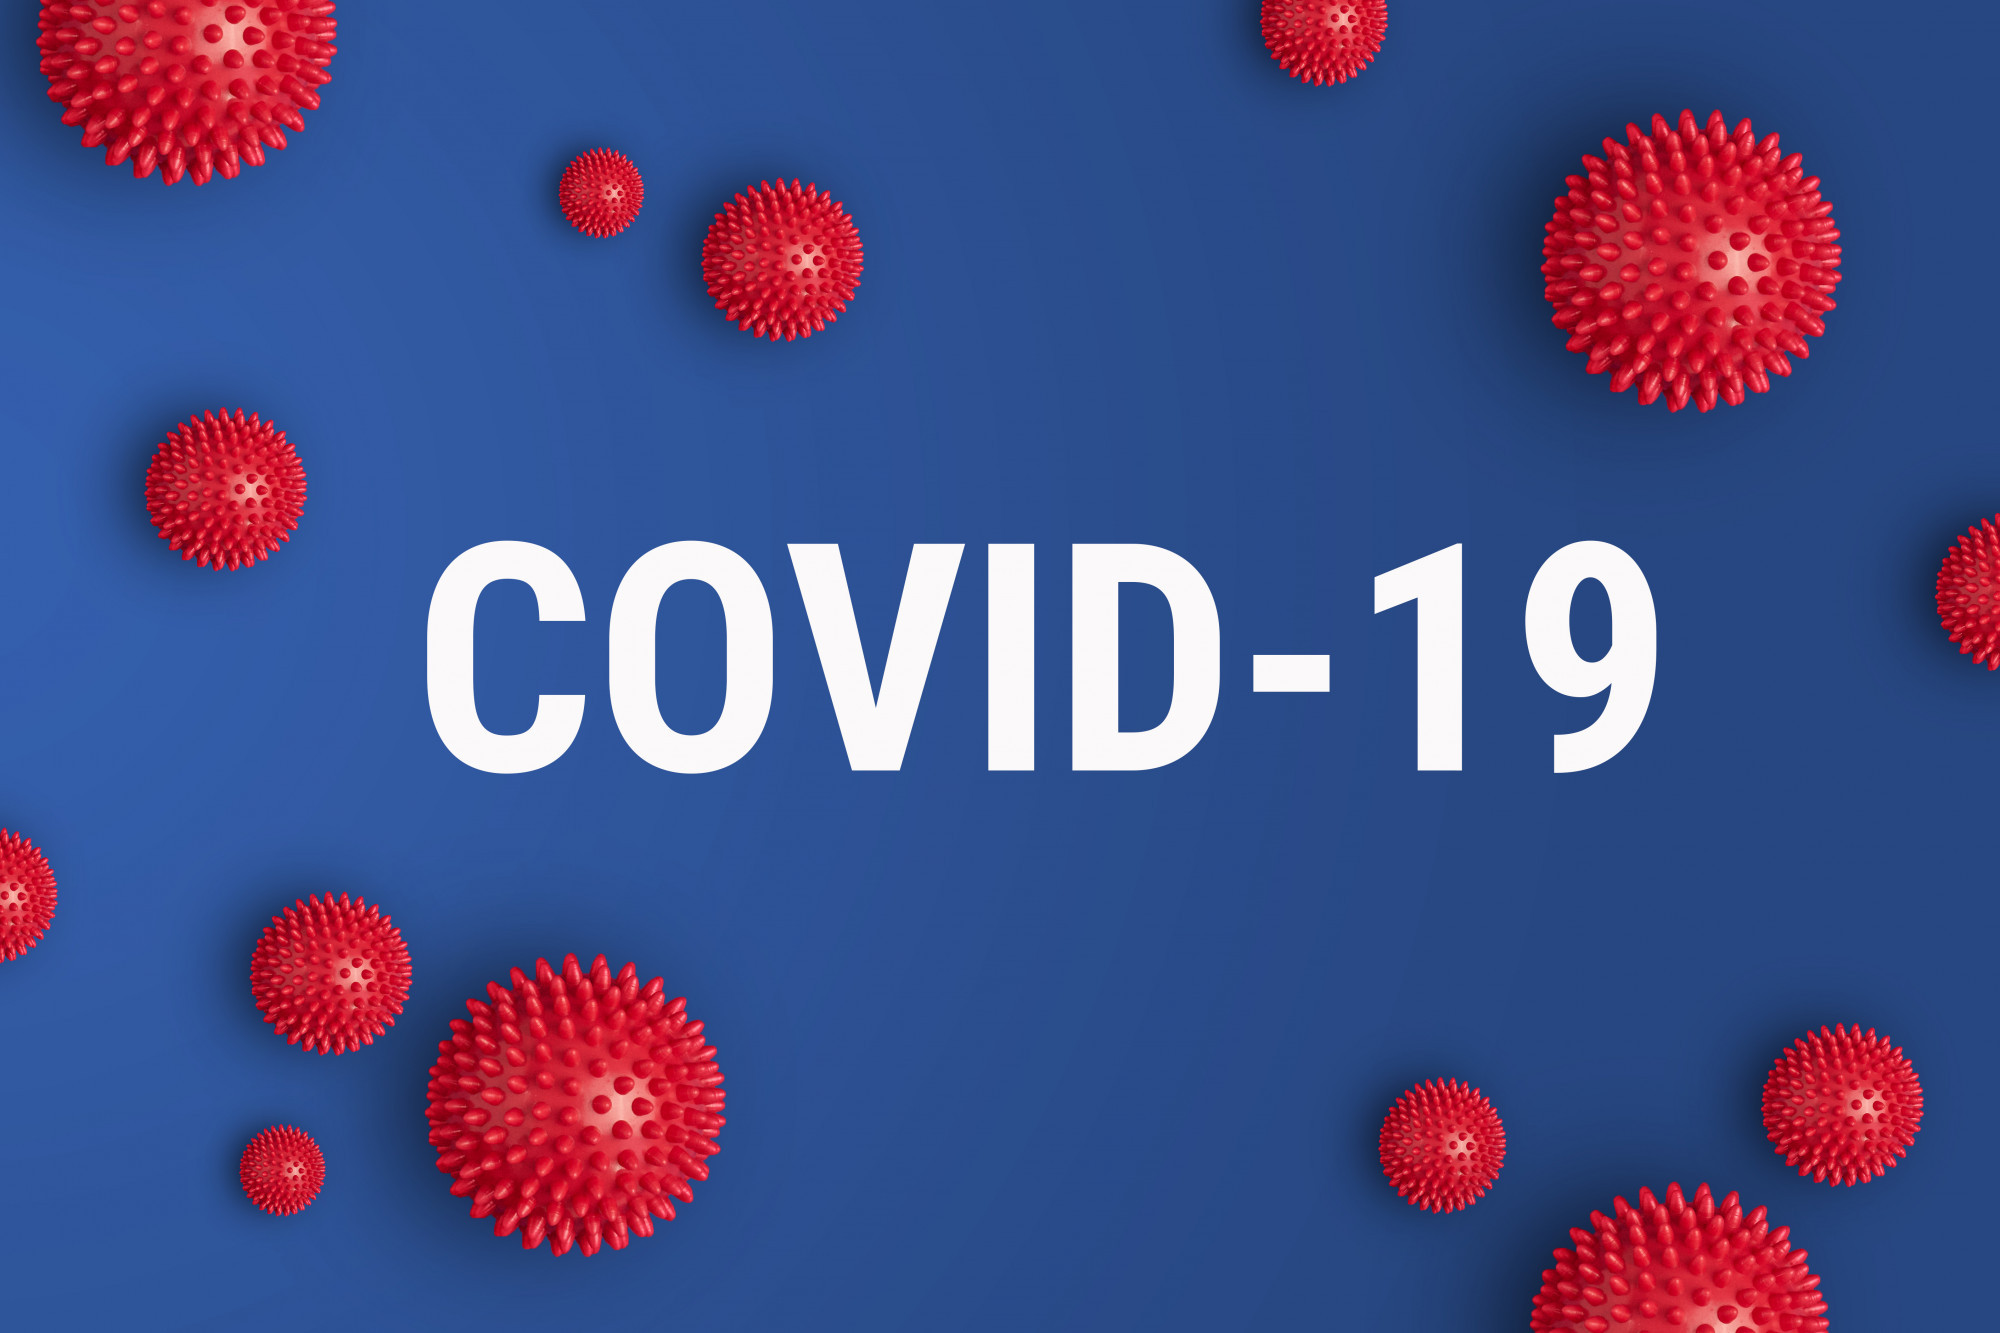 NEW CASE: A further overseas-acquired case of COVID-19 has been identified as part of routine testing in a Cairns quarantine hotel.